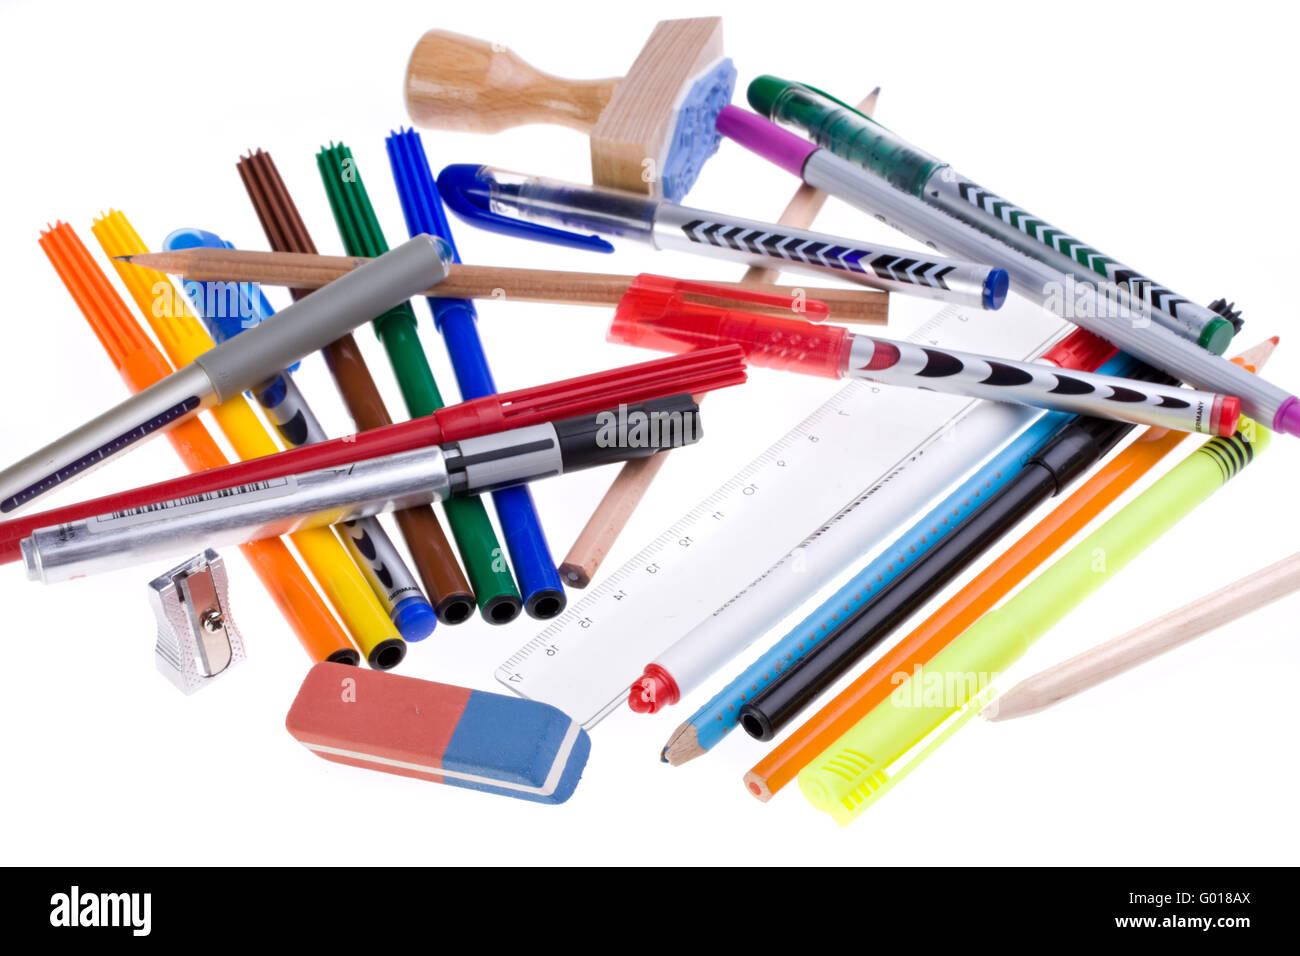 https://c8.alamy.com/comp/G018AX/writing-utensils-pens-and-an-eraser-isolated-on-white-background-G018AX.jpg